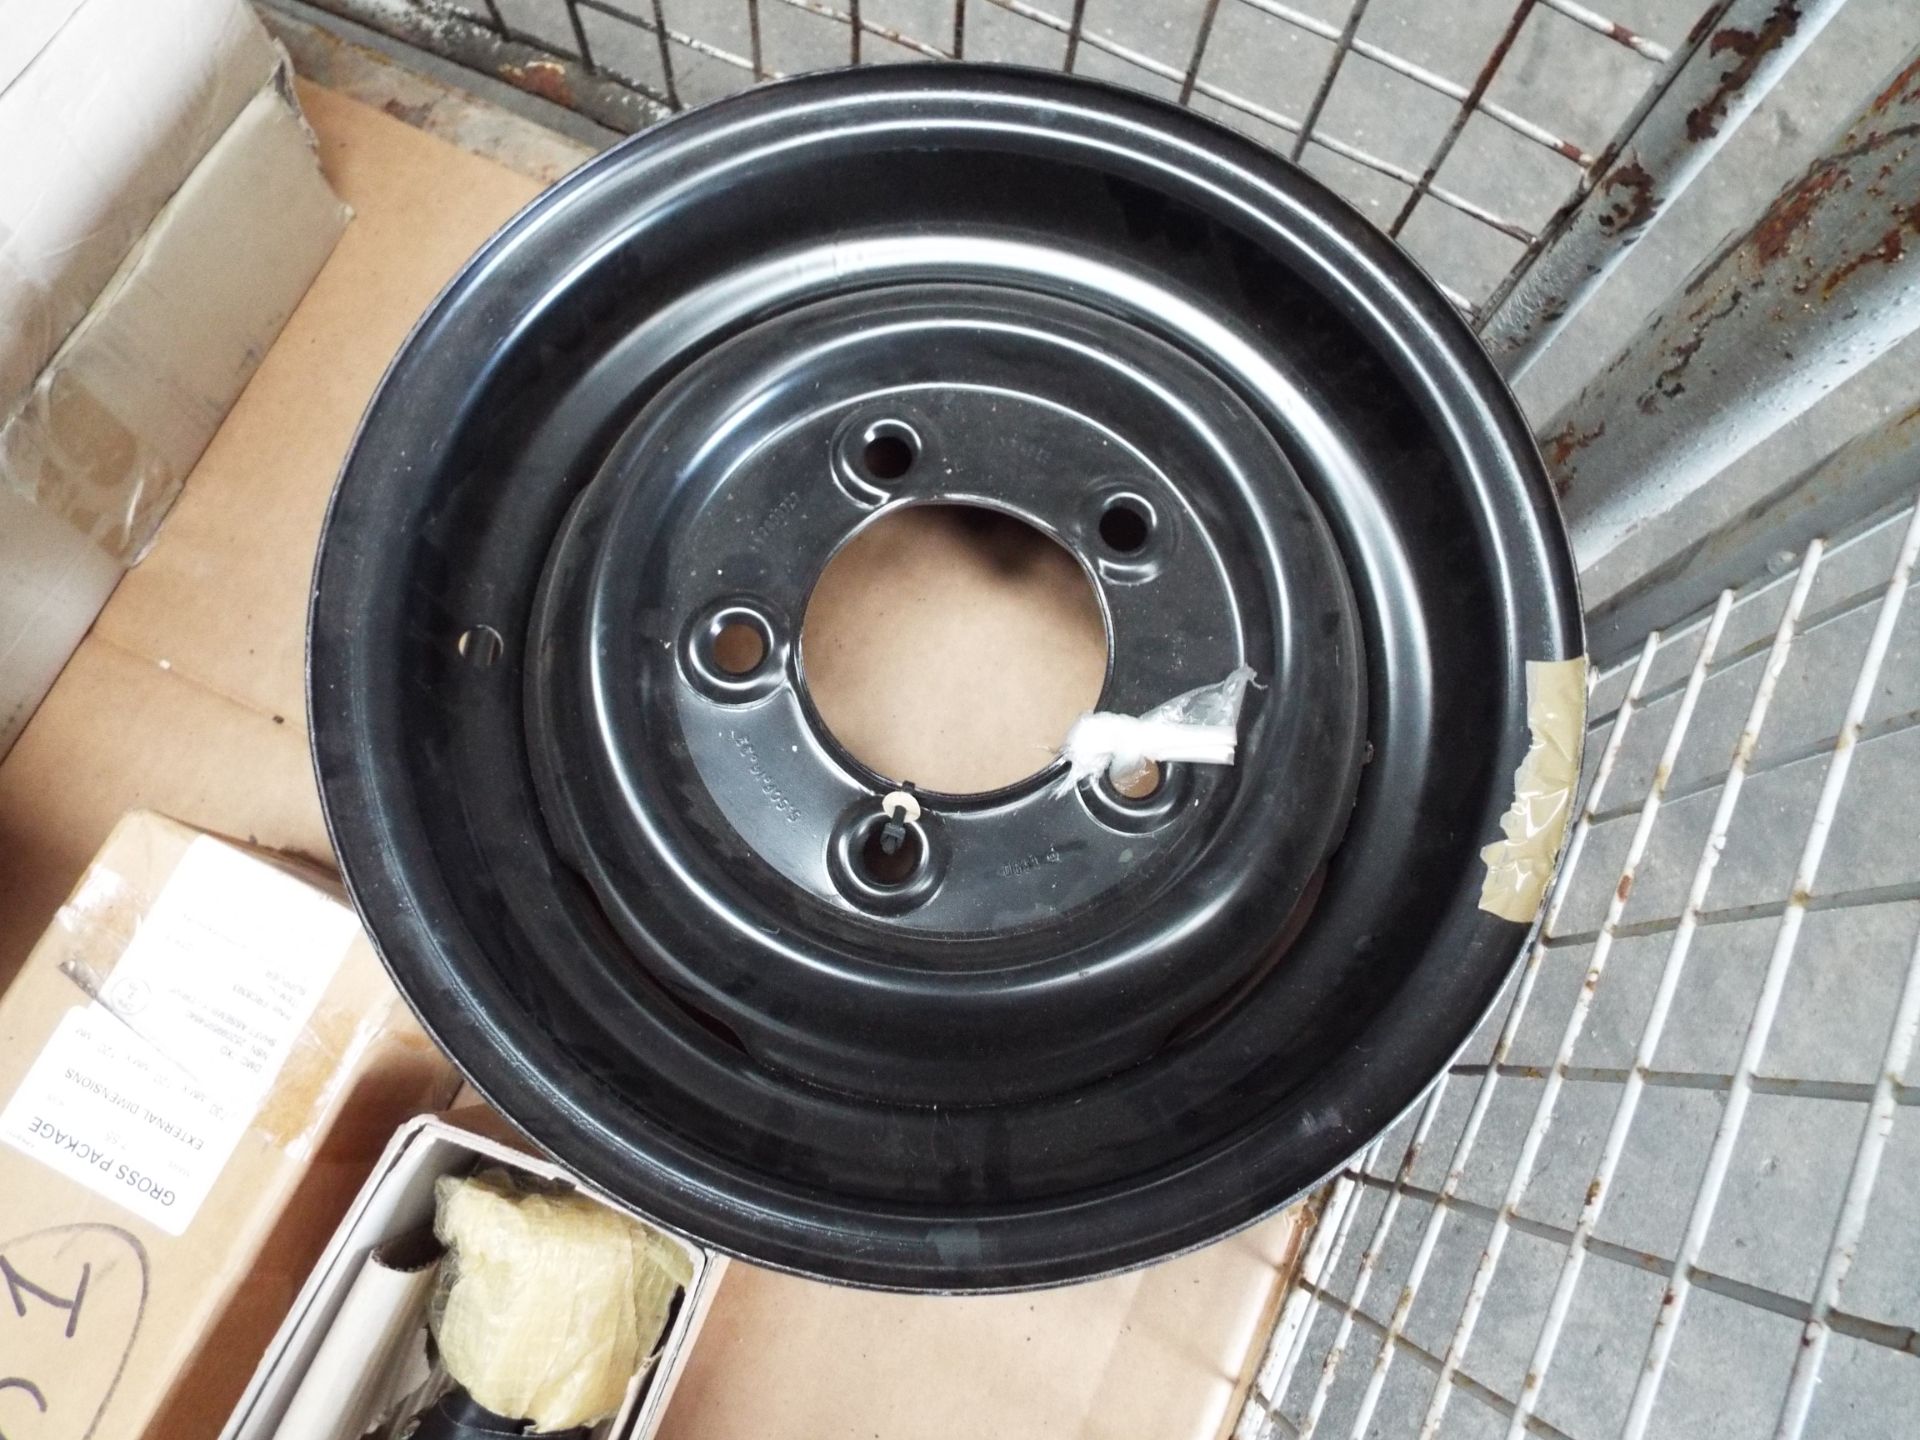 Mixed Stillage of Land Rover Parts inc Brake Discs, Prop Shafts and Wheel Rim - Image 6 of 7